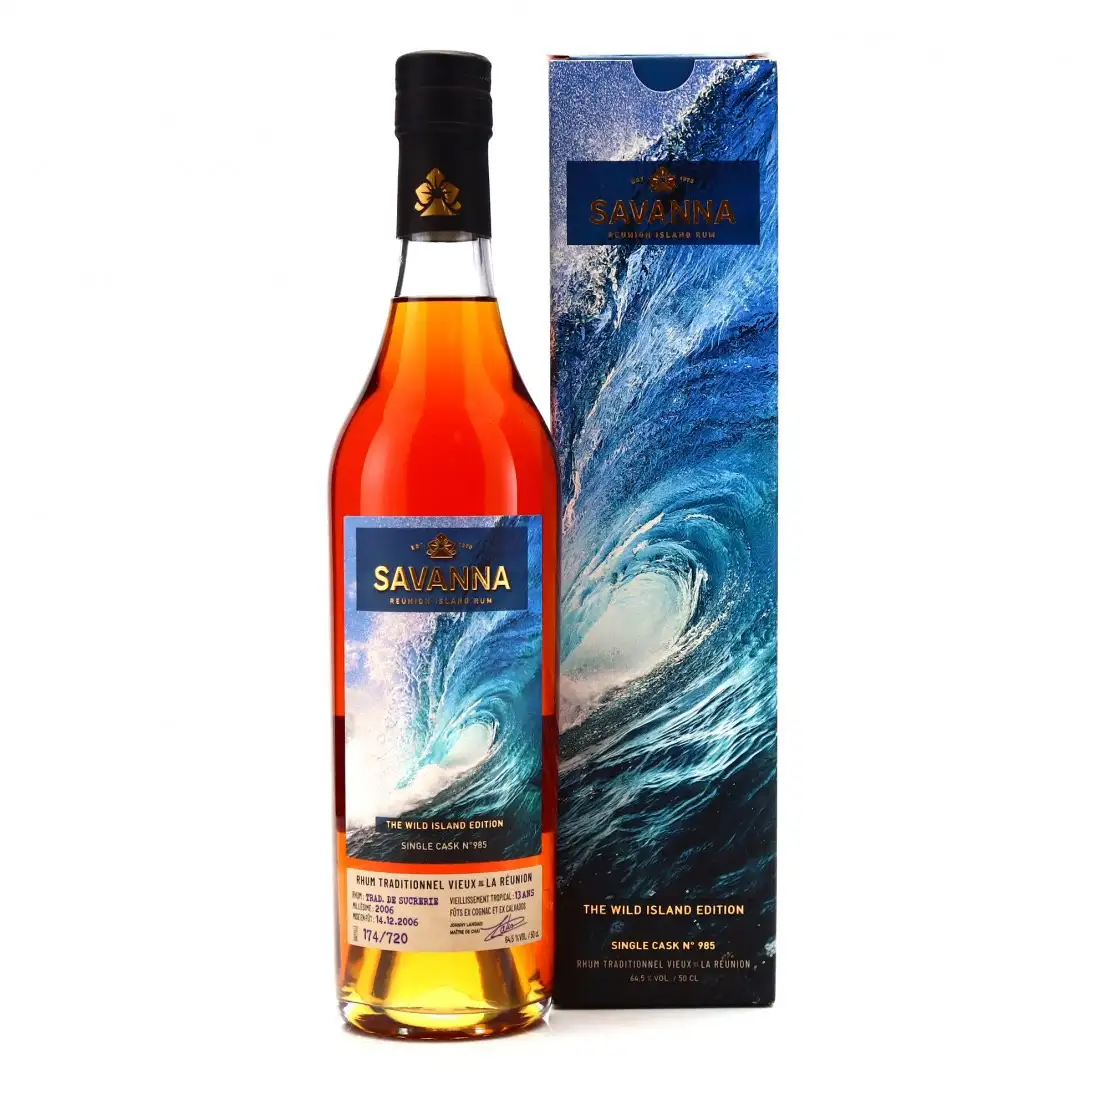 Image of the front of the bottle of the rum The Wild Island Edition - Vague